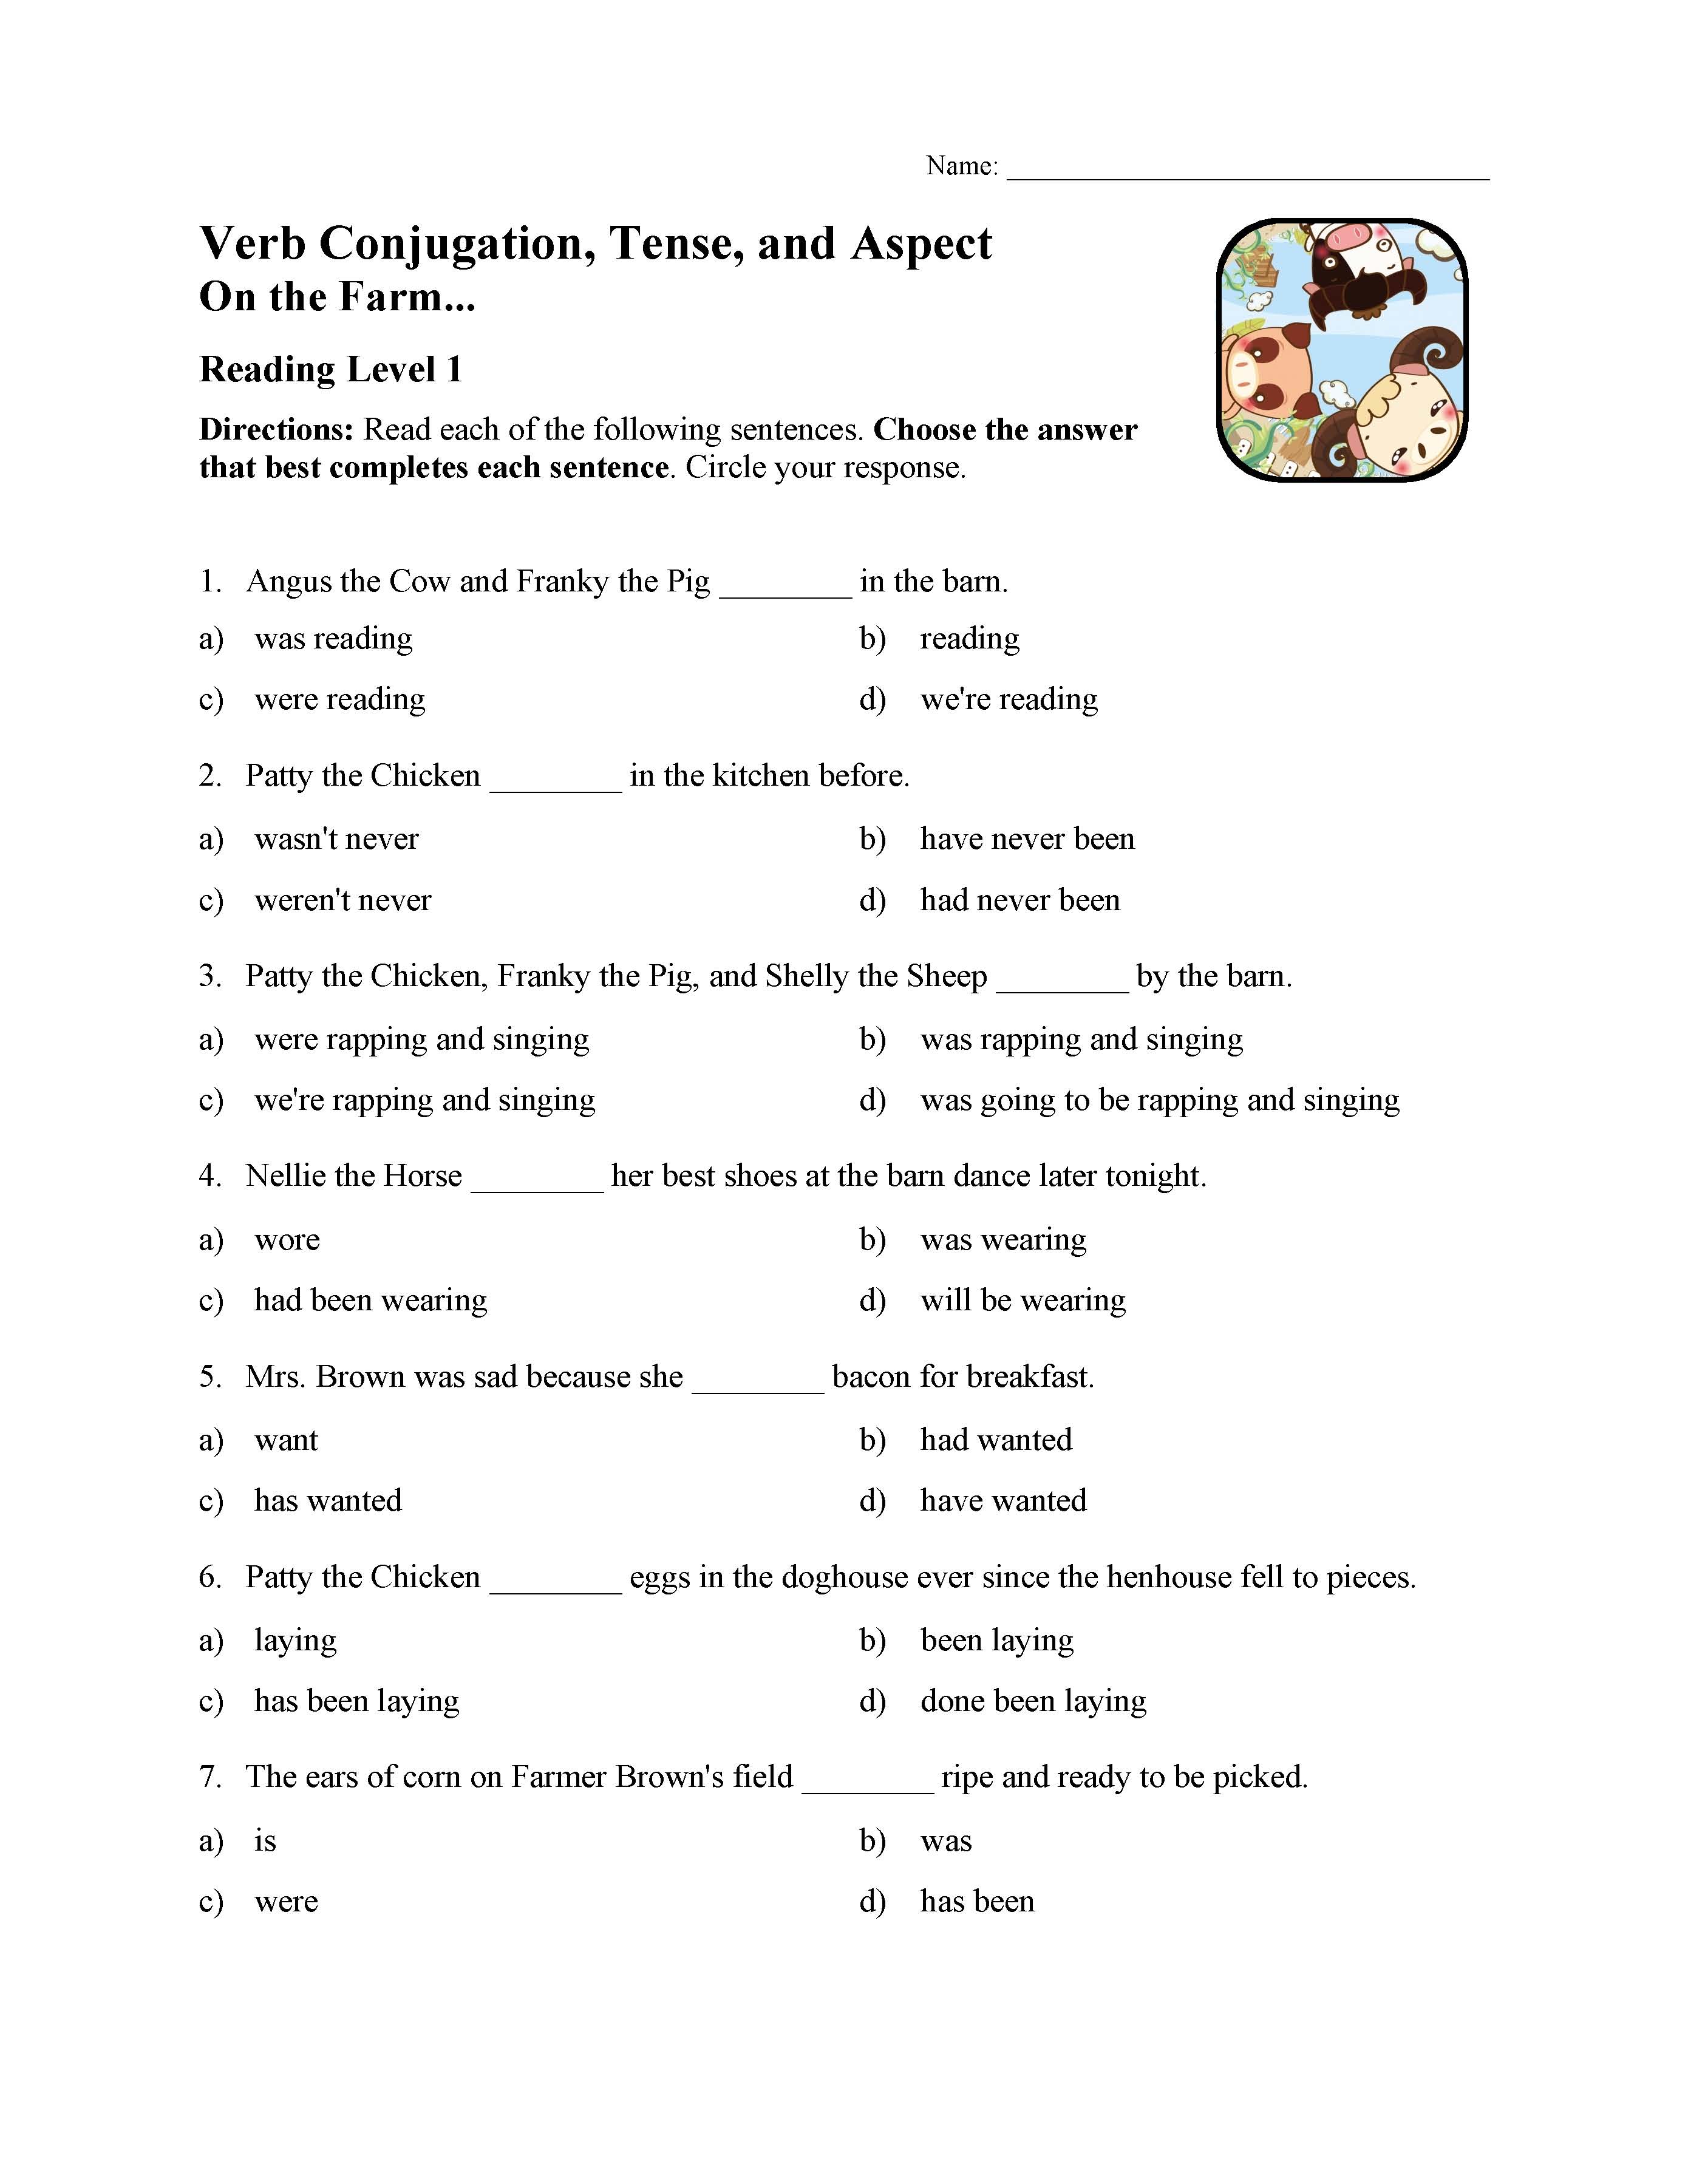 Verb Conjugation Tense And Aspect Test On The Farm Reading Level 1 Preview